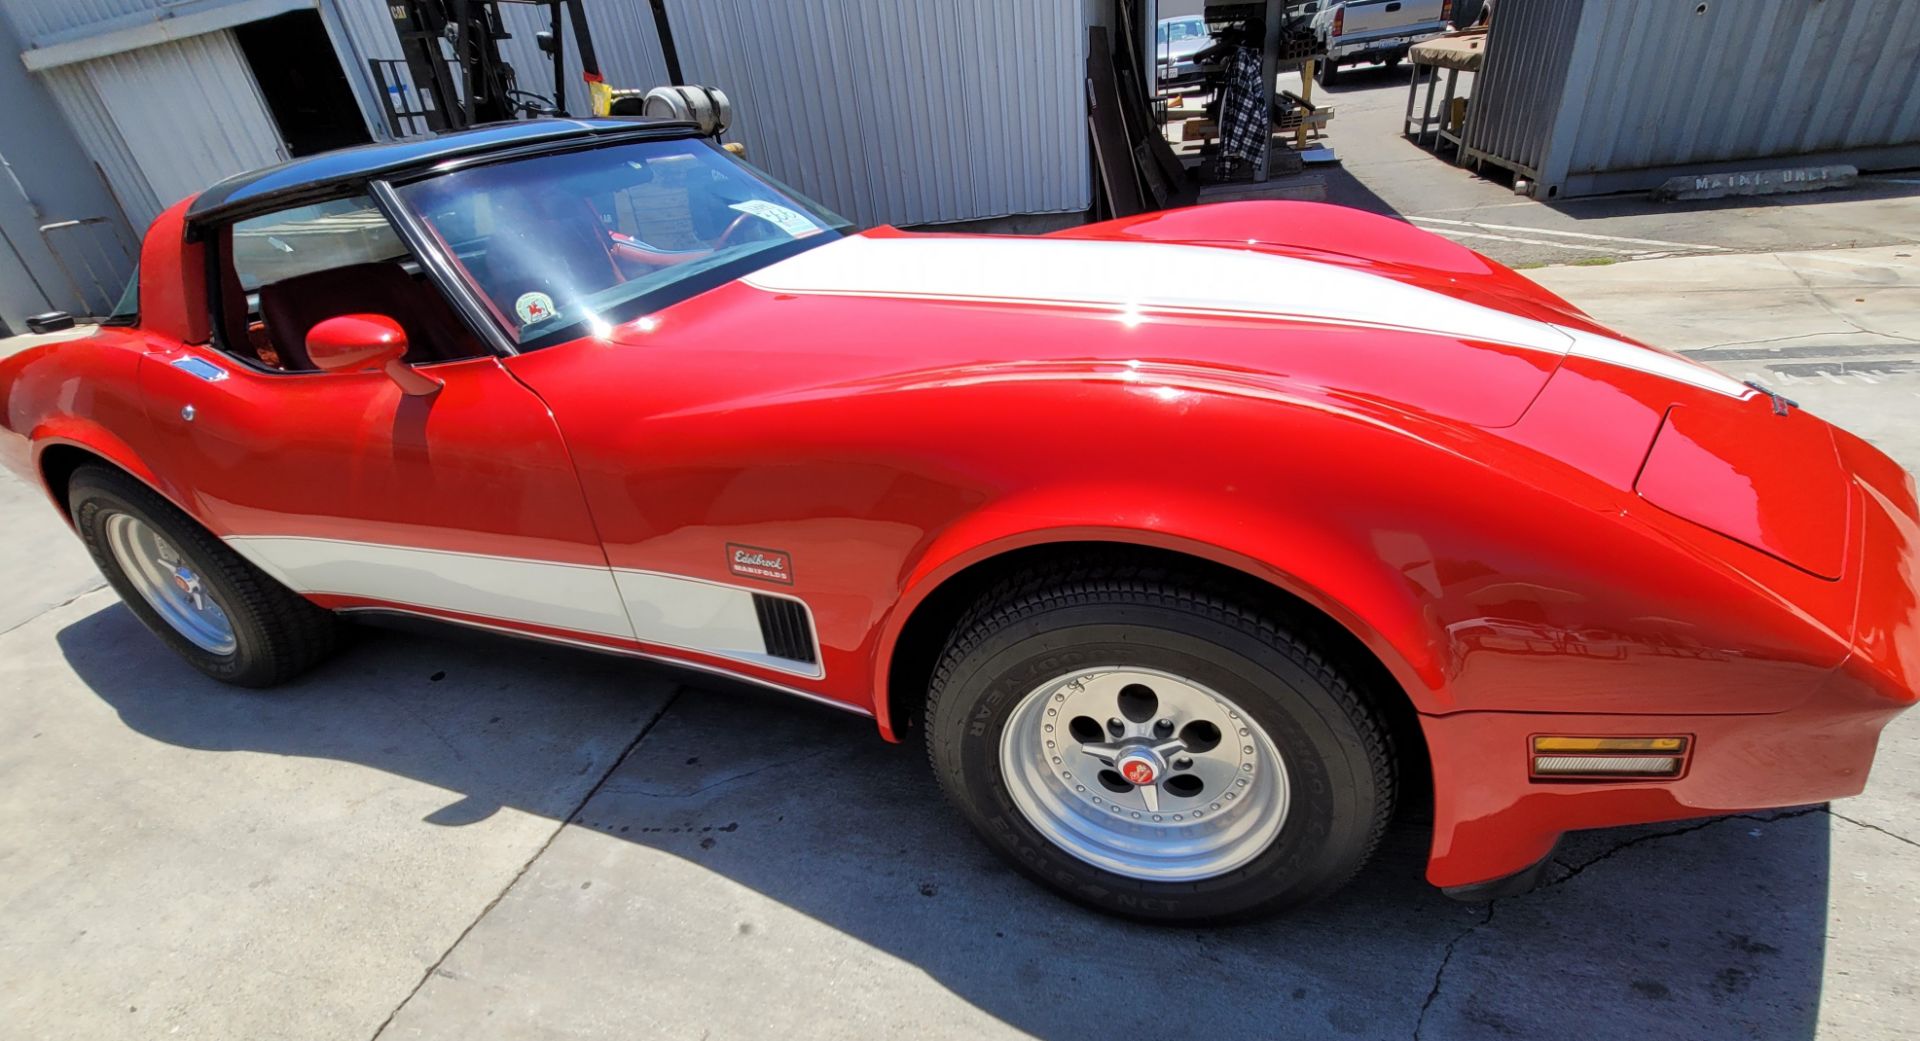 1980 CHEVROLET CORVETTE, WAS VIC EDELBROCK'S PERSONAL CAR BOUGHT FOR R&D, RED INTERIOR, TITLE ONLY. - Image 54 of 70